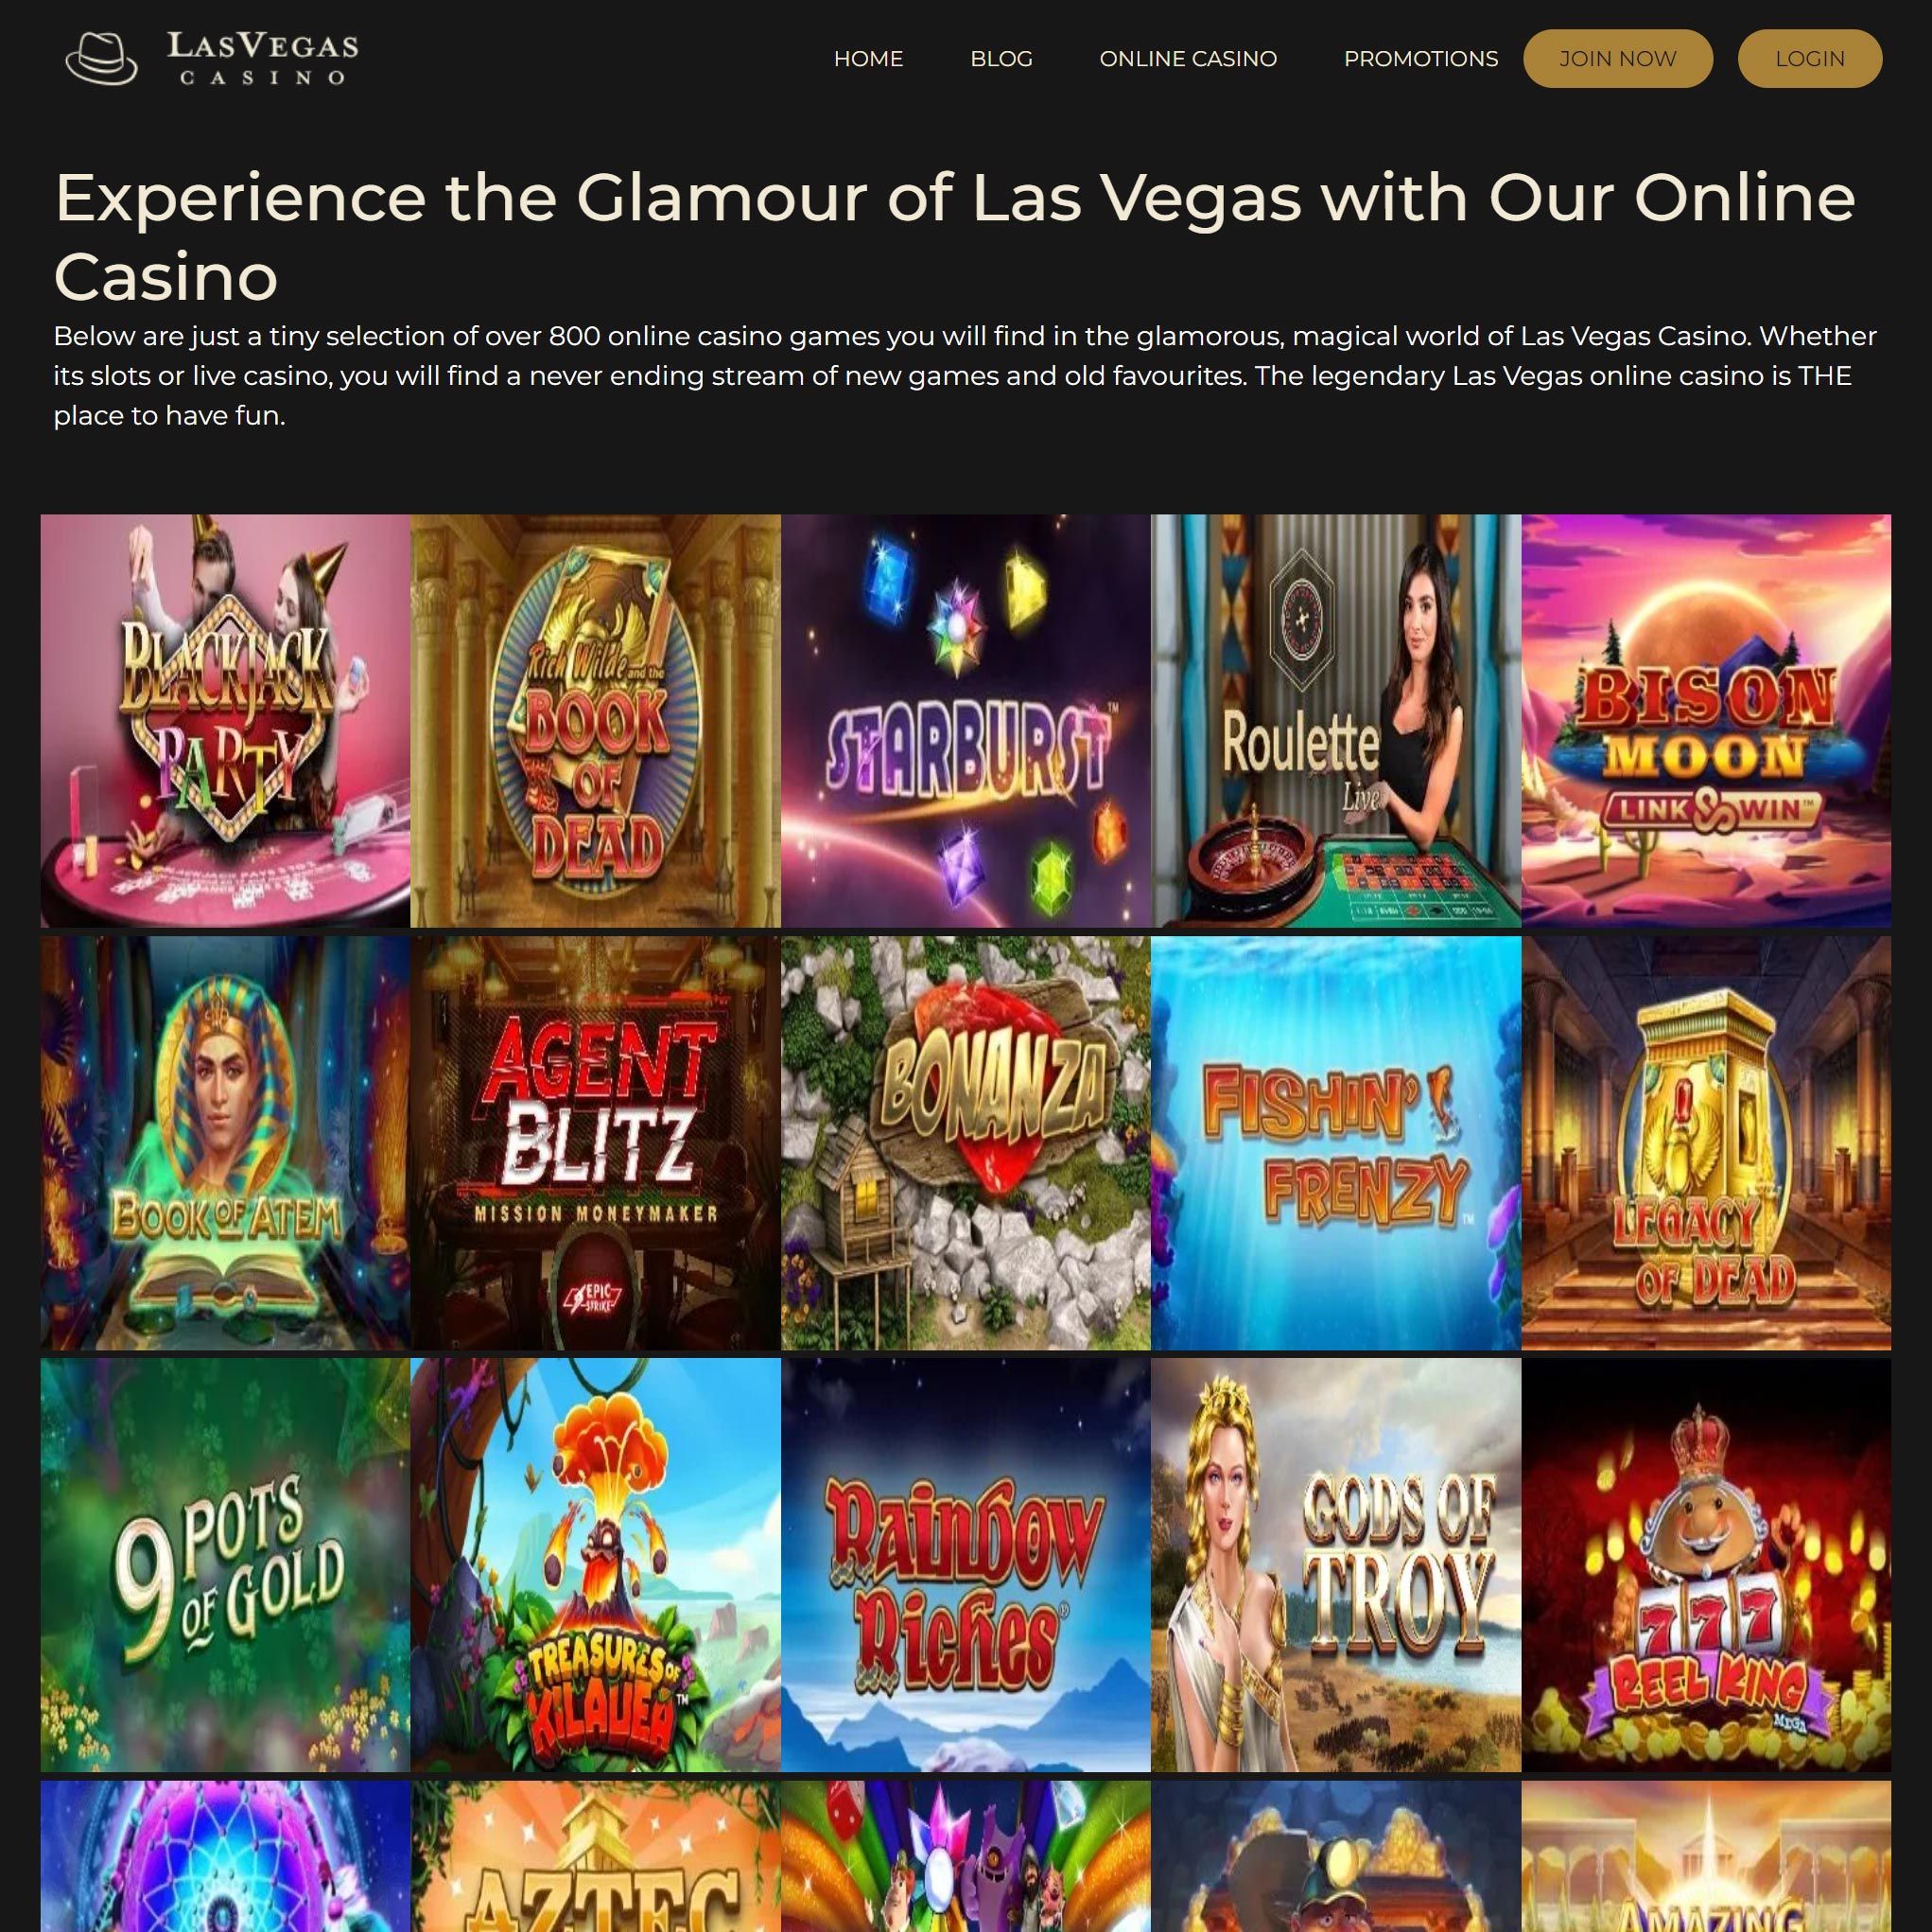 Can You Really Find casino on the Web?